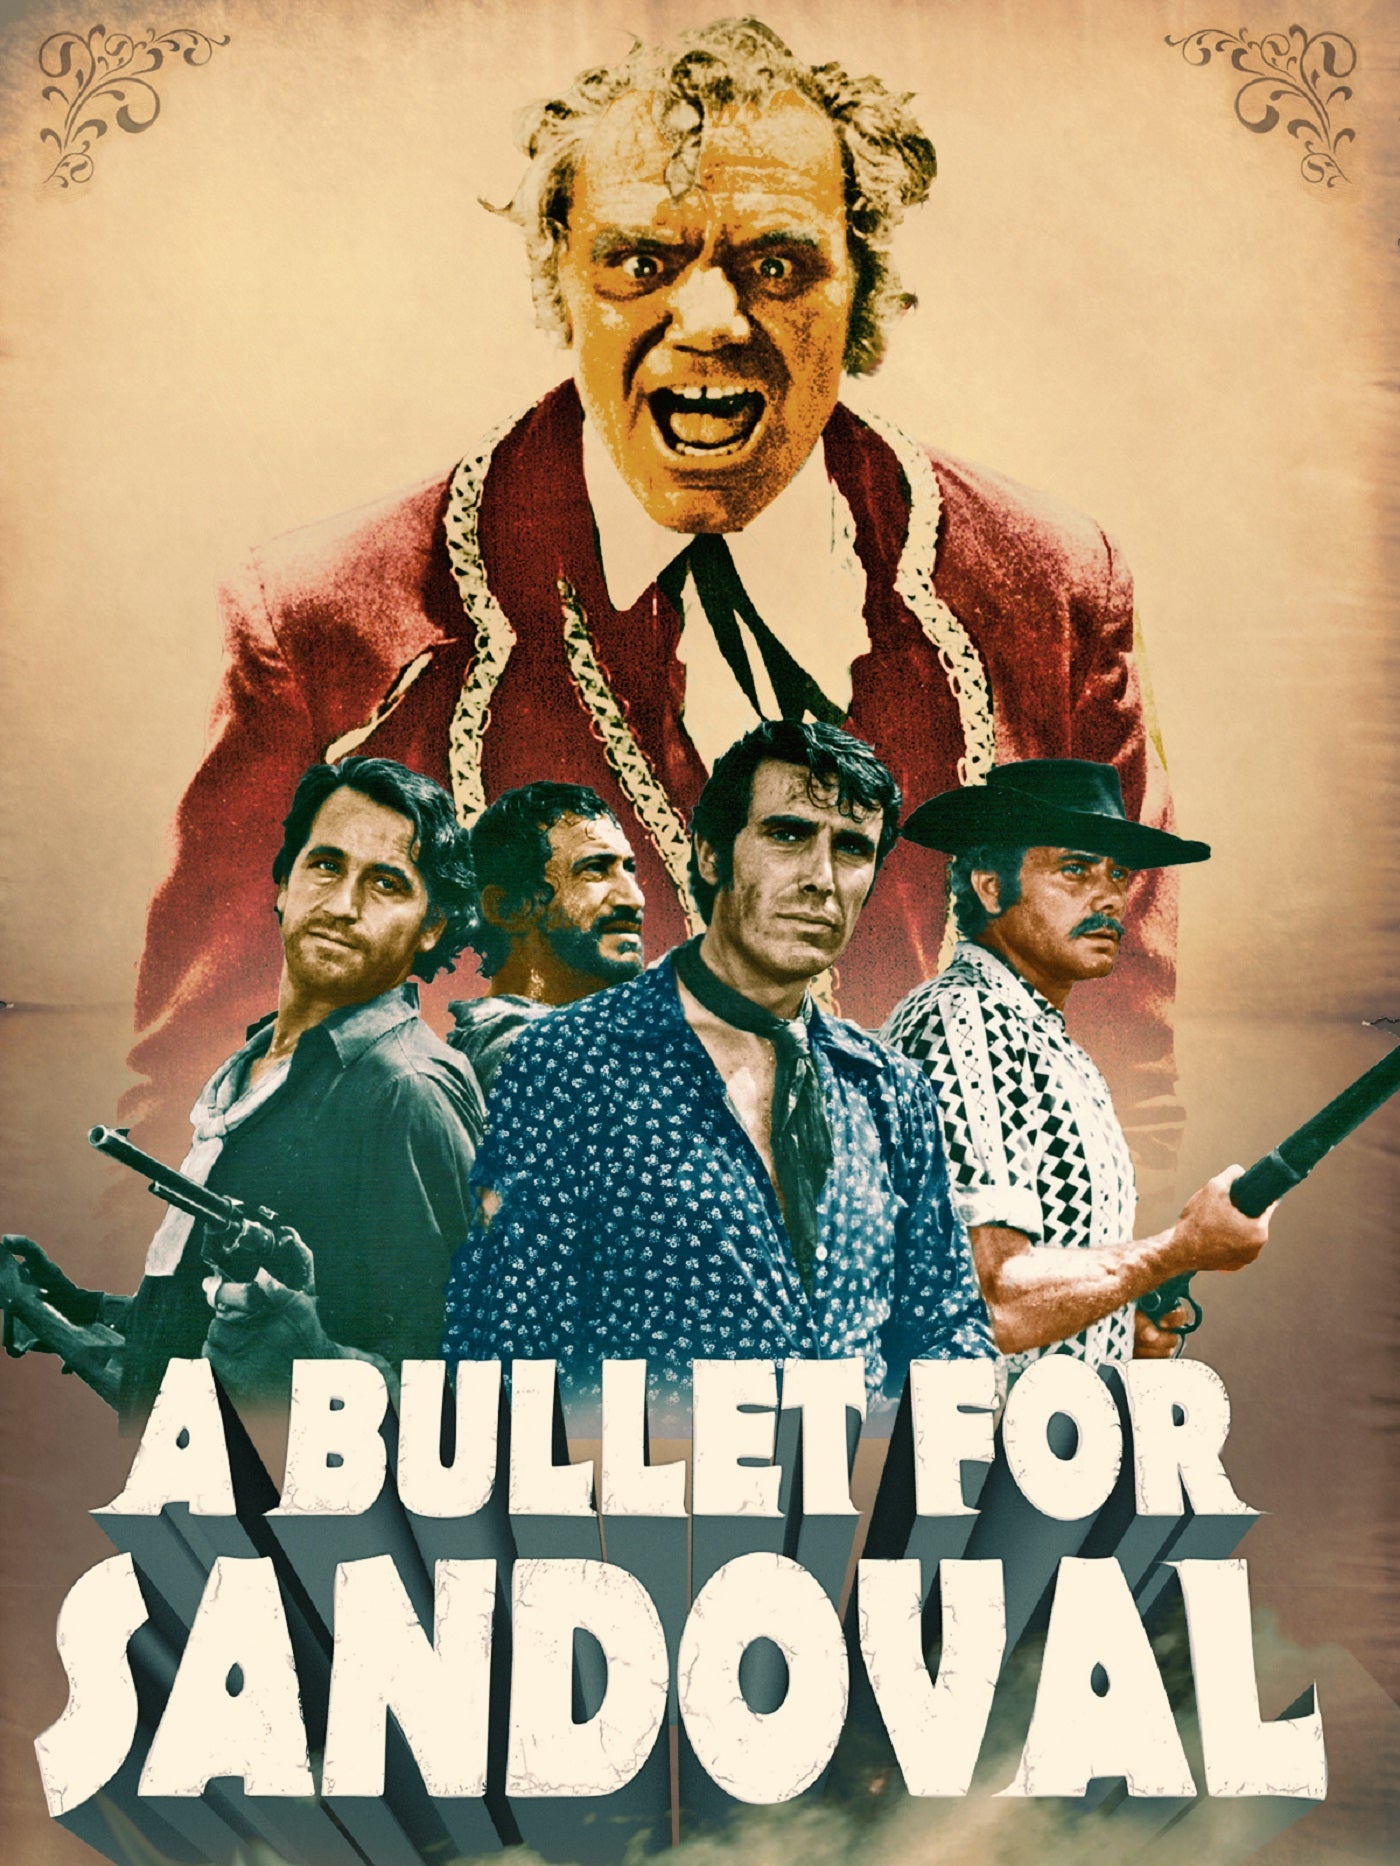 A BULLET FOR SANDOVAL BLU-RAY